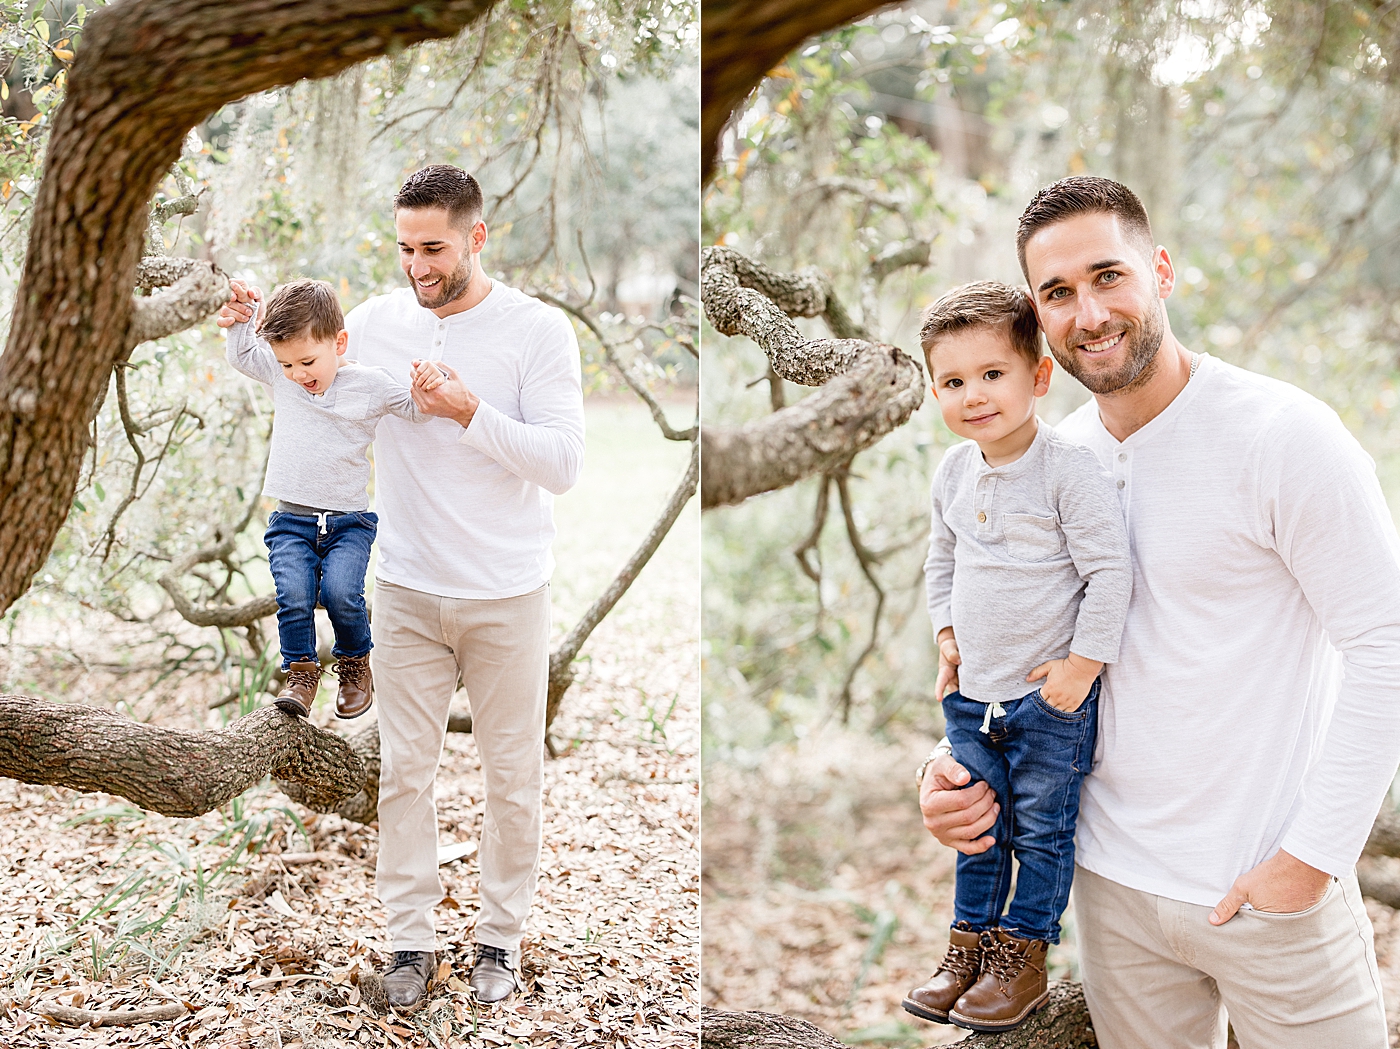 Kevin Kiermaier and his son during family maternity session with Brittany Elise Photography.